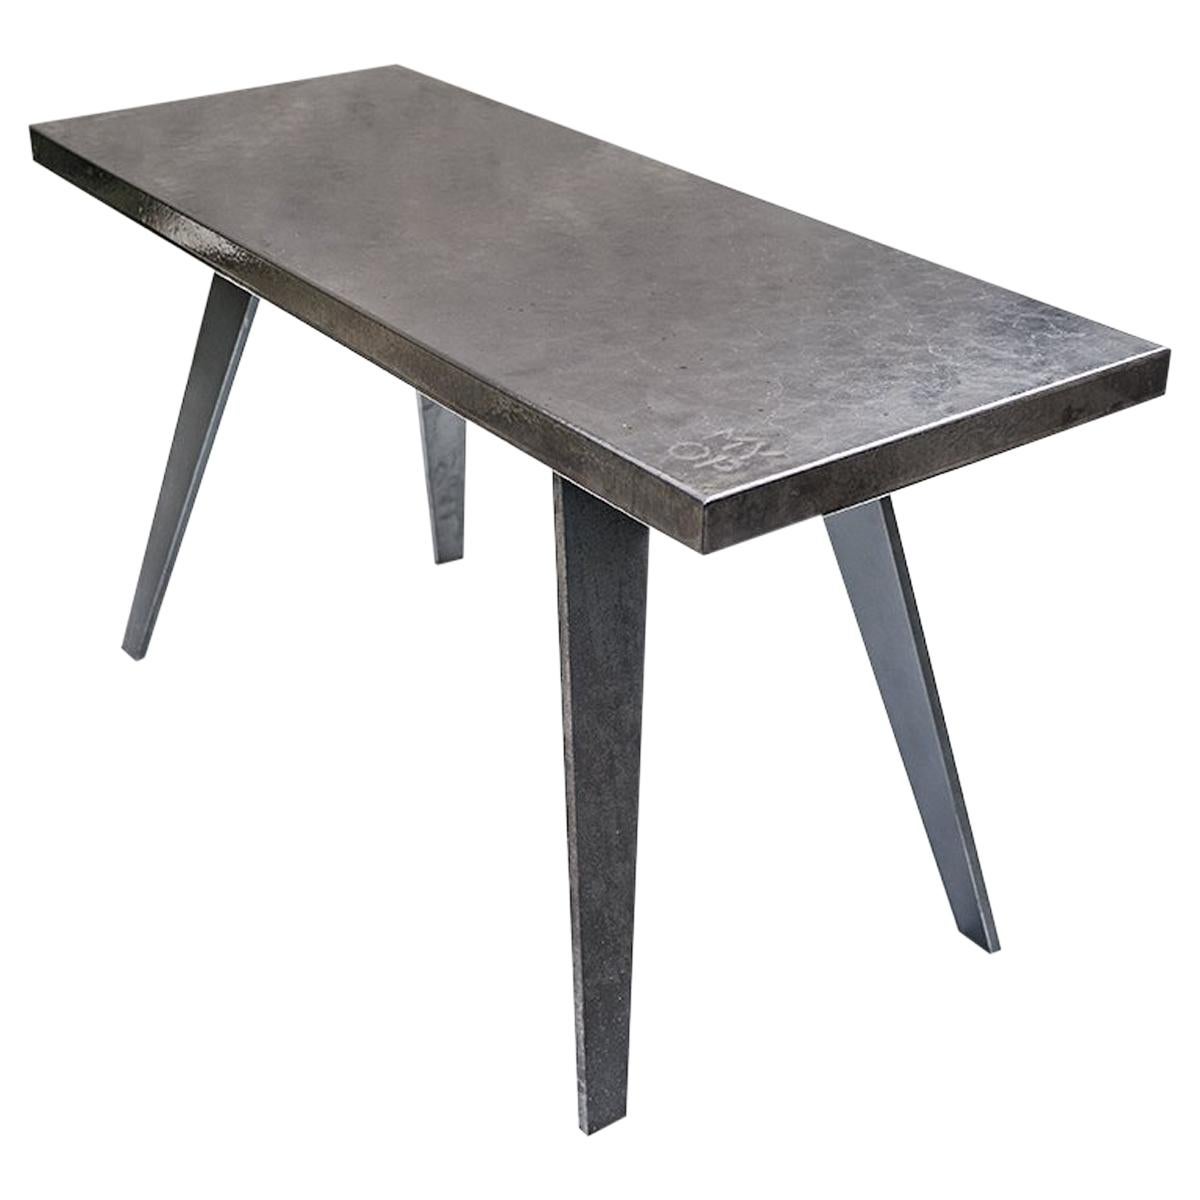 Outdoor Bench in Etna Lava Stone and Steel, Venturae V4, Filodifumo For Sale